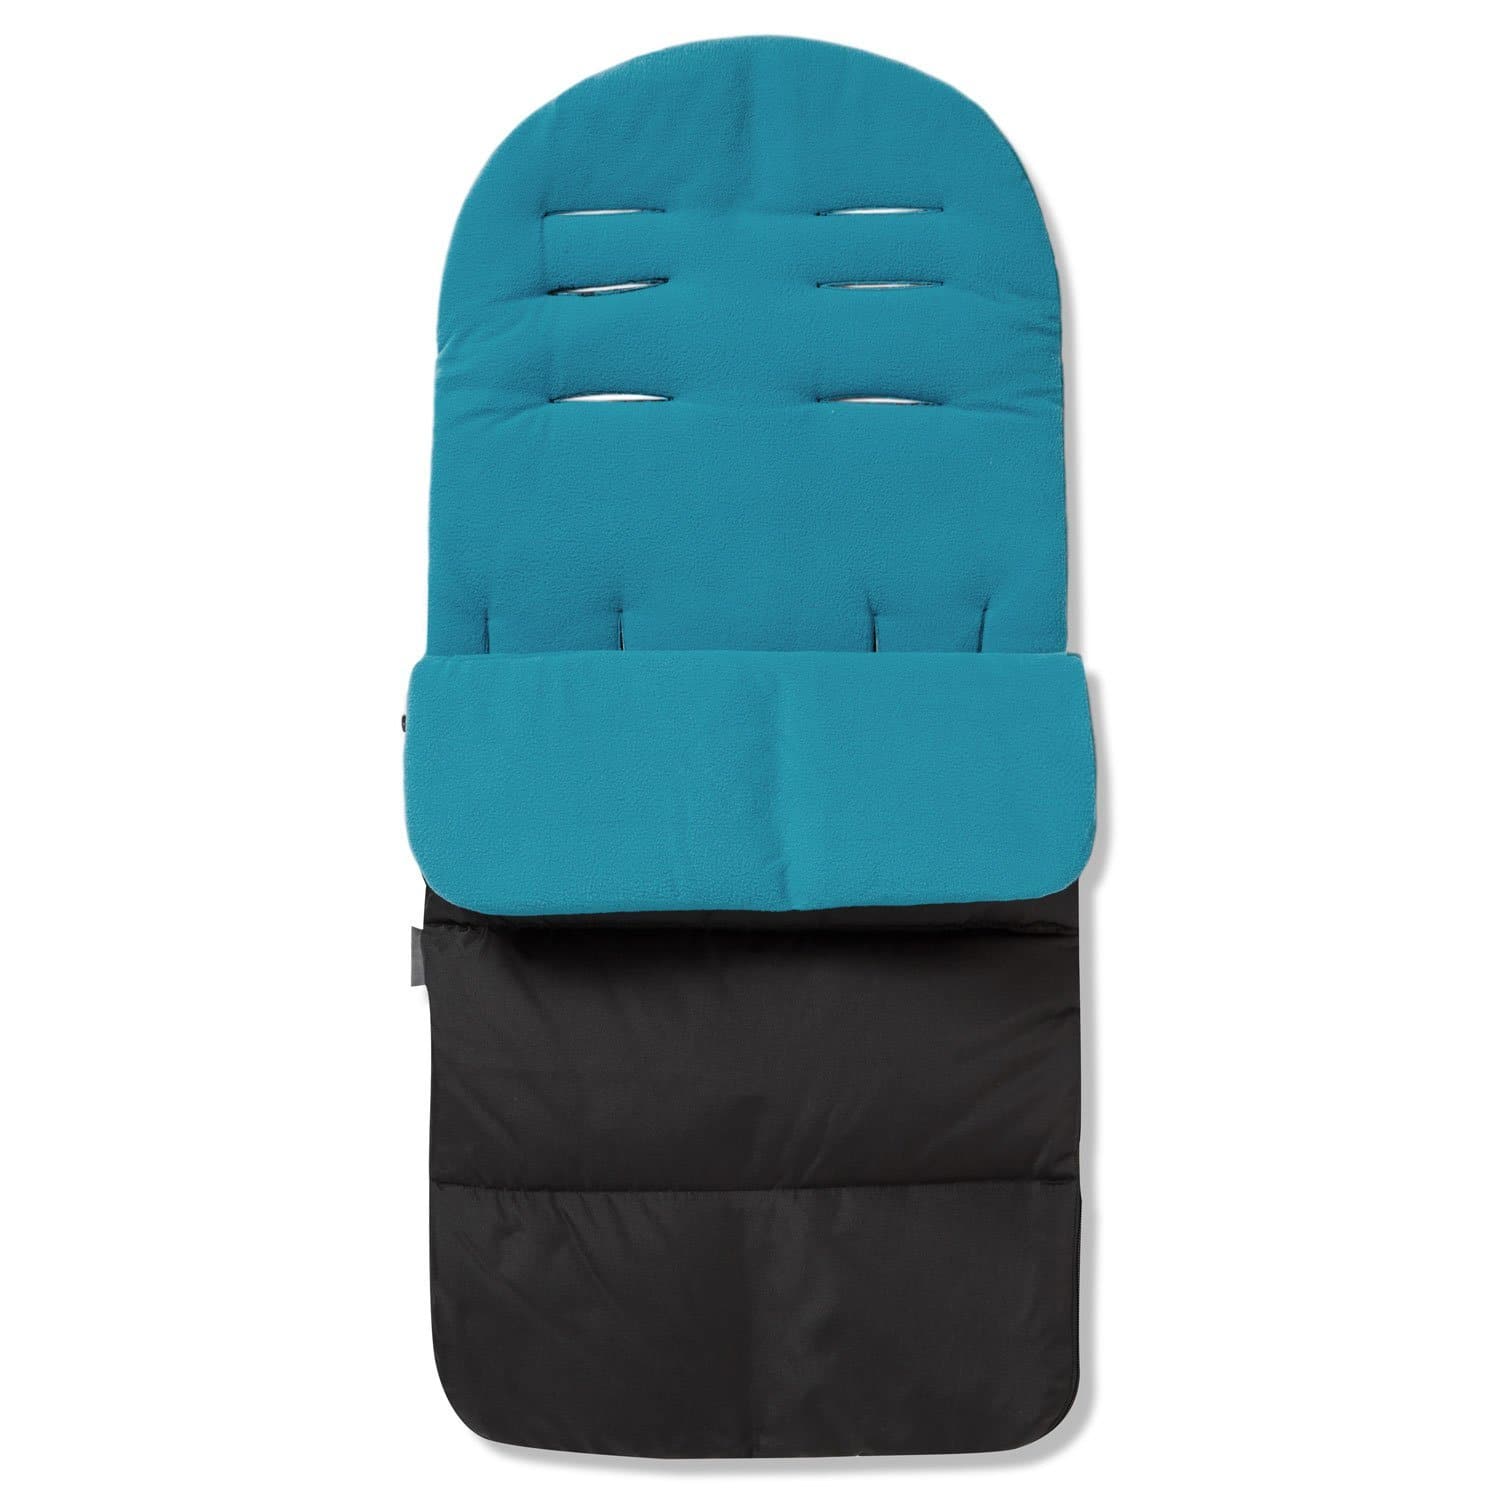 Premium Footmuff / Cosy Toes Compatible with Kinderkraft - Ocean Blue / Fits All Models | For Your Little One